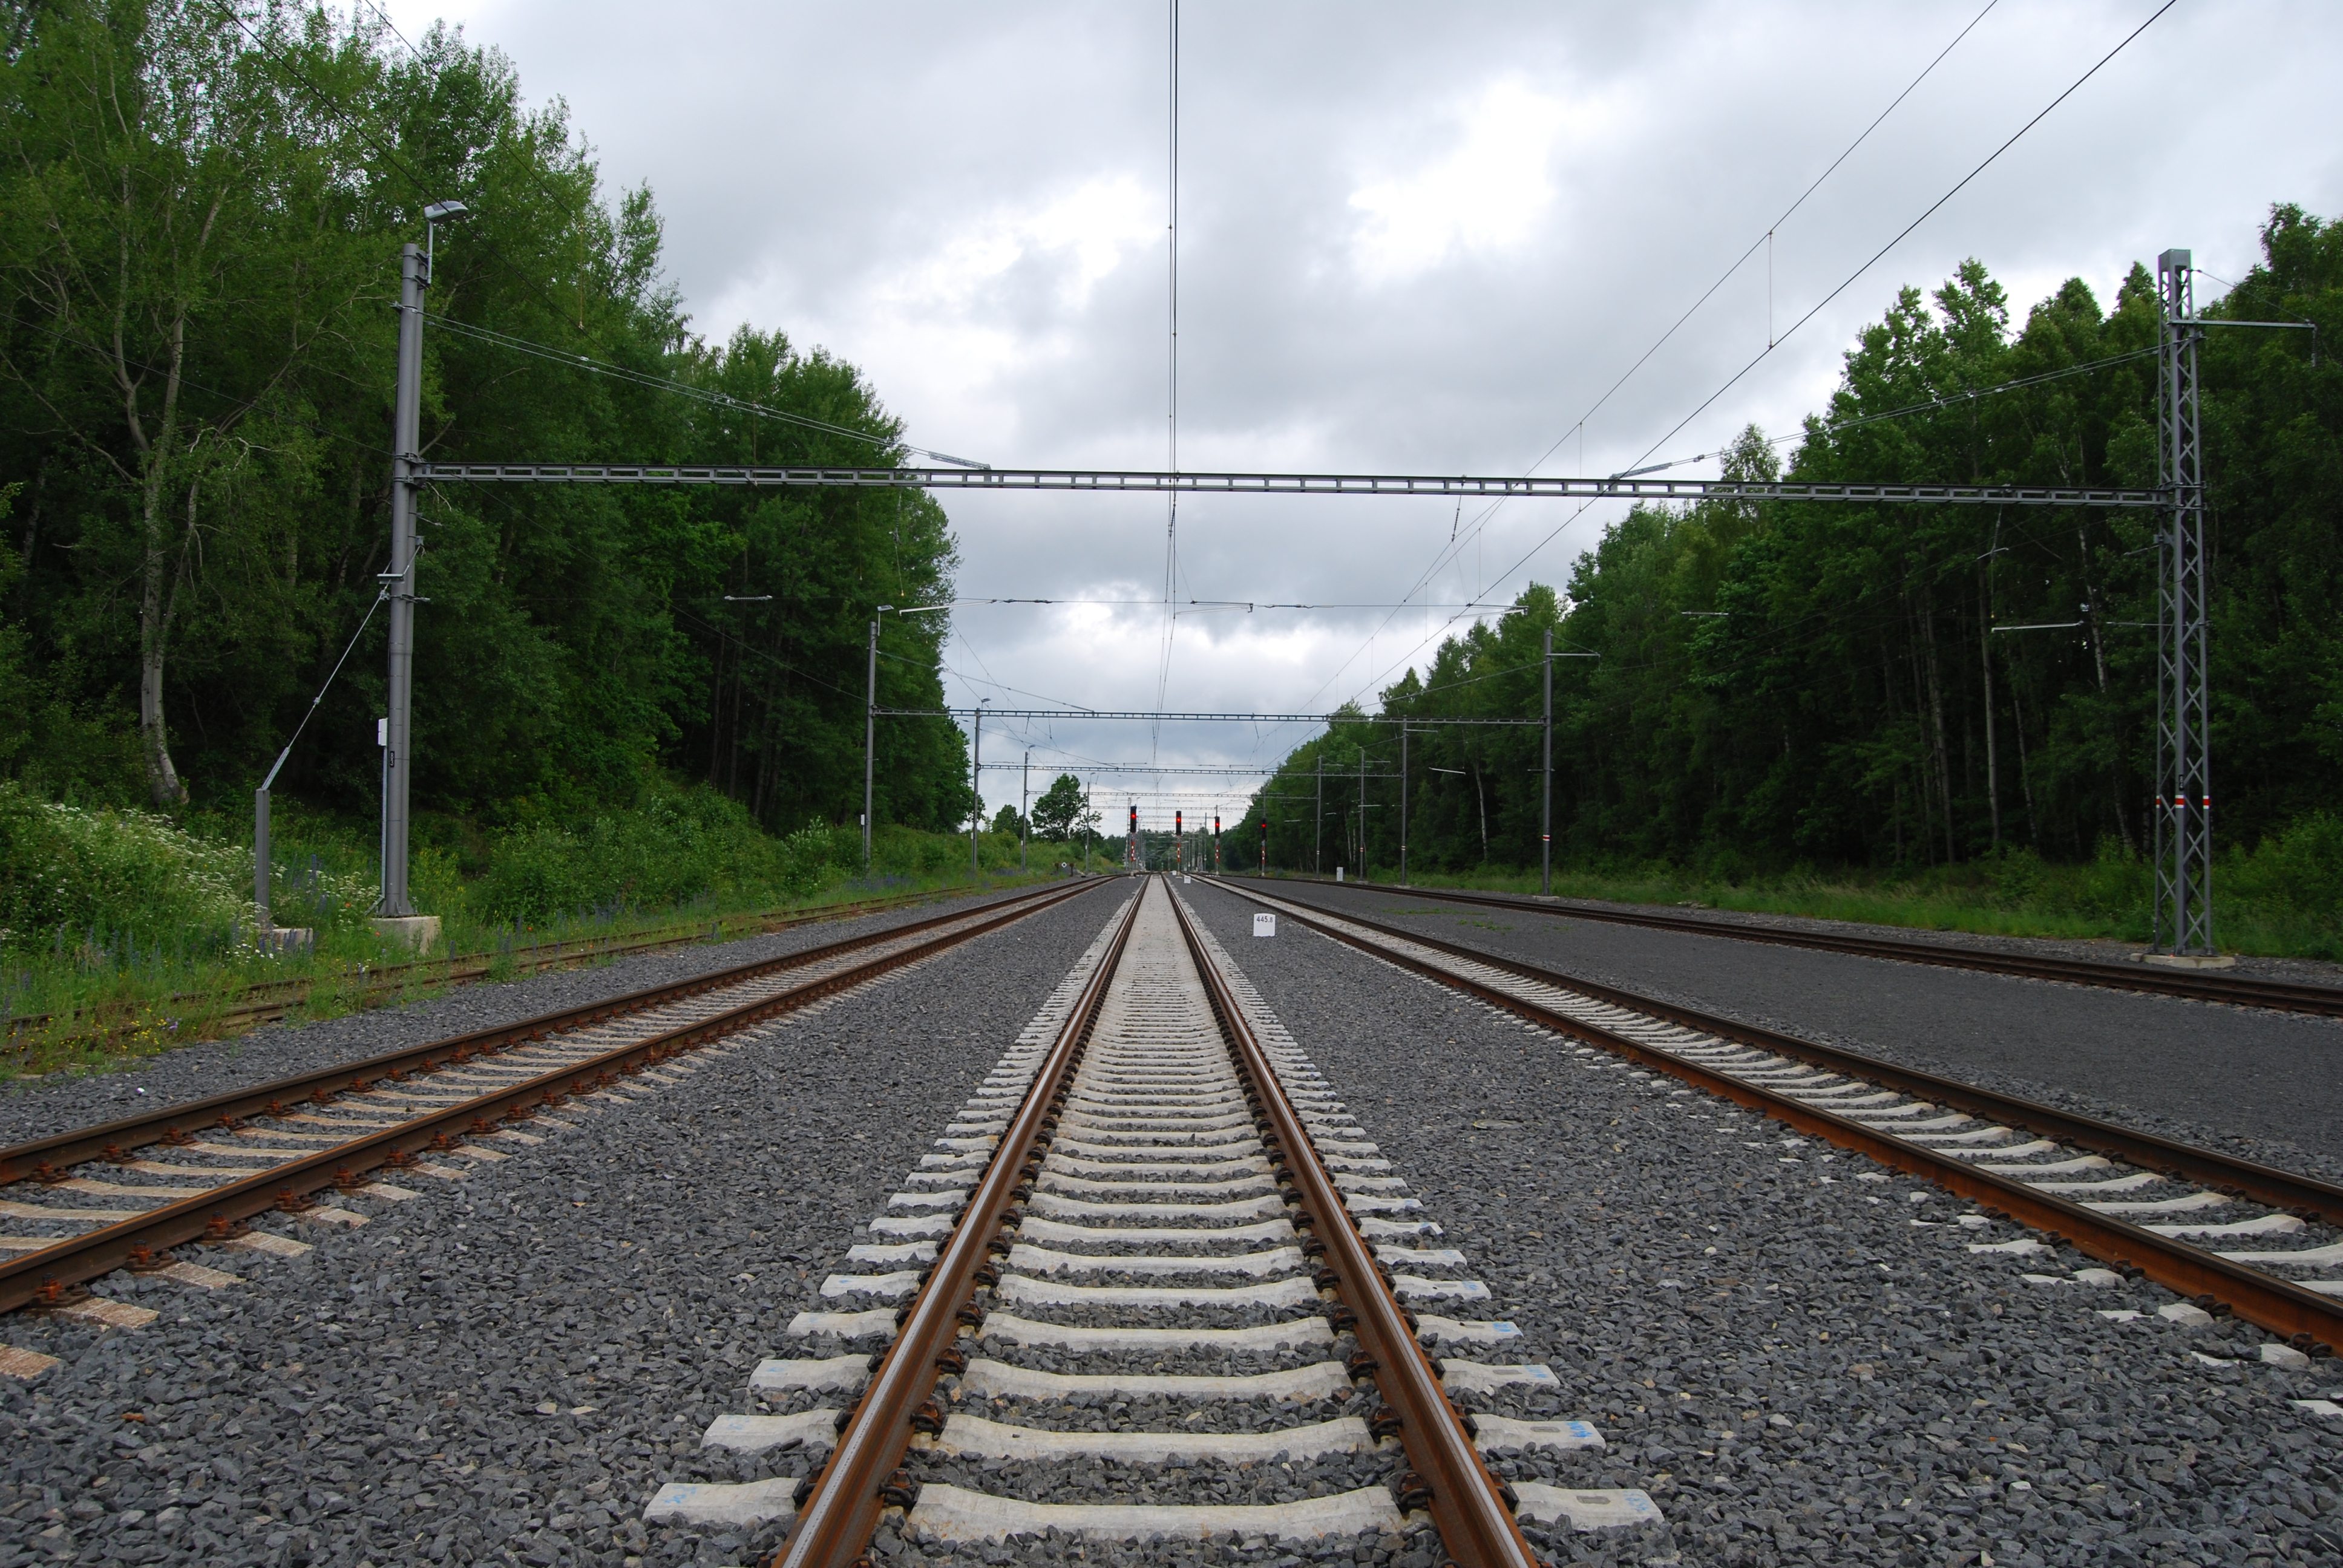 As of August, an agreement between railway authorities simplifies the arrival of trains to Poland